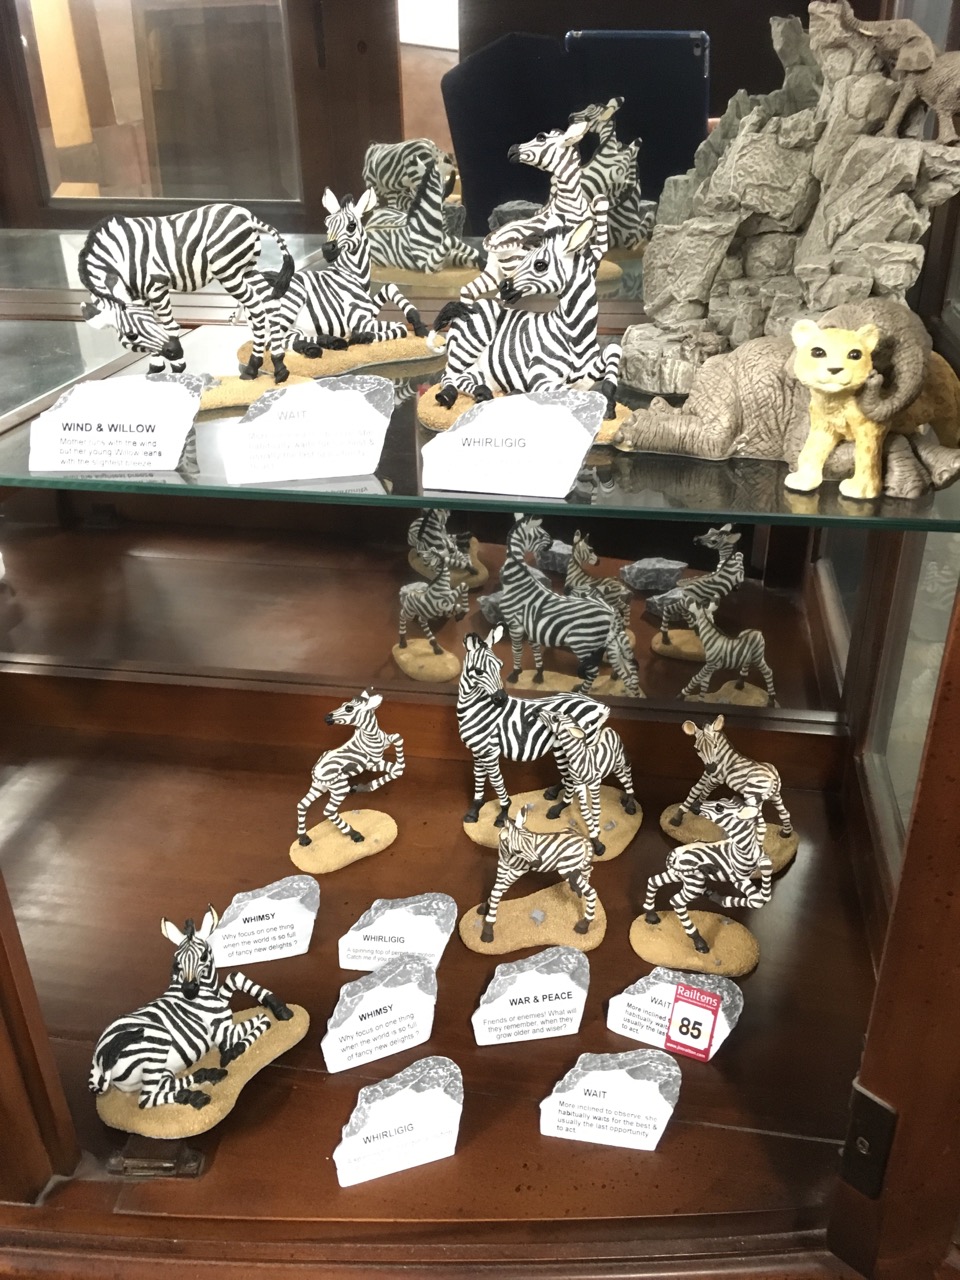 A collection of zebras with accompanying titles on faux rocks; a similar elephant and tiger model